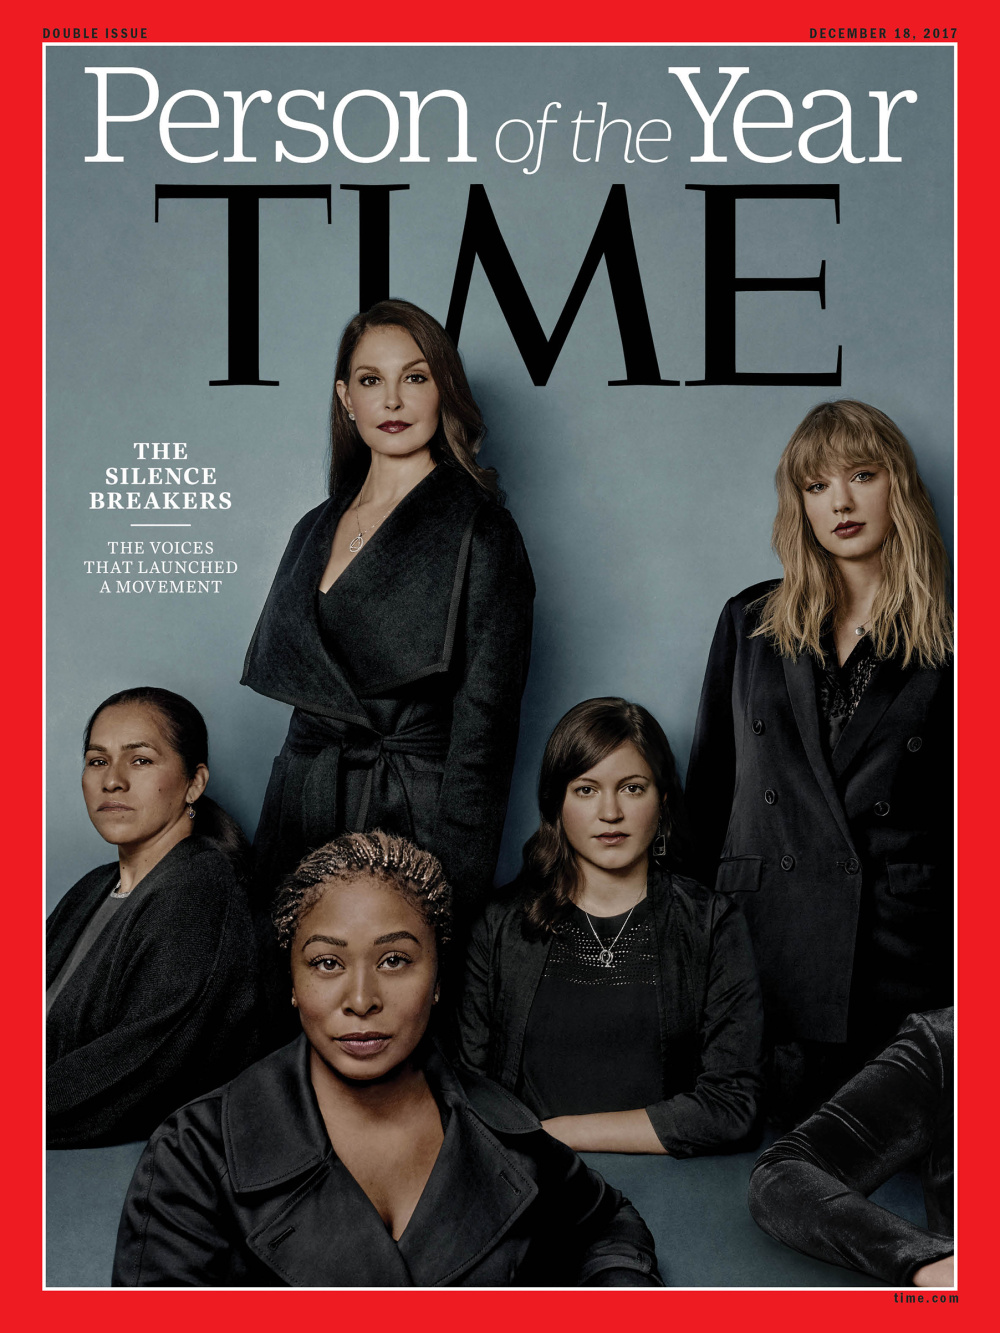 TIME magazine selects 'silence breakers' as 2017's Person of the year.